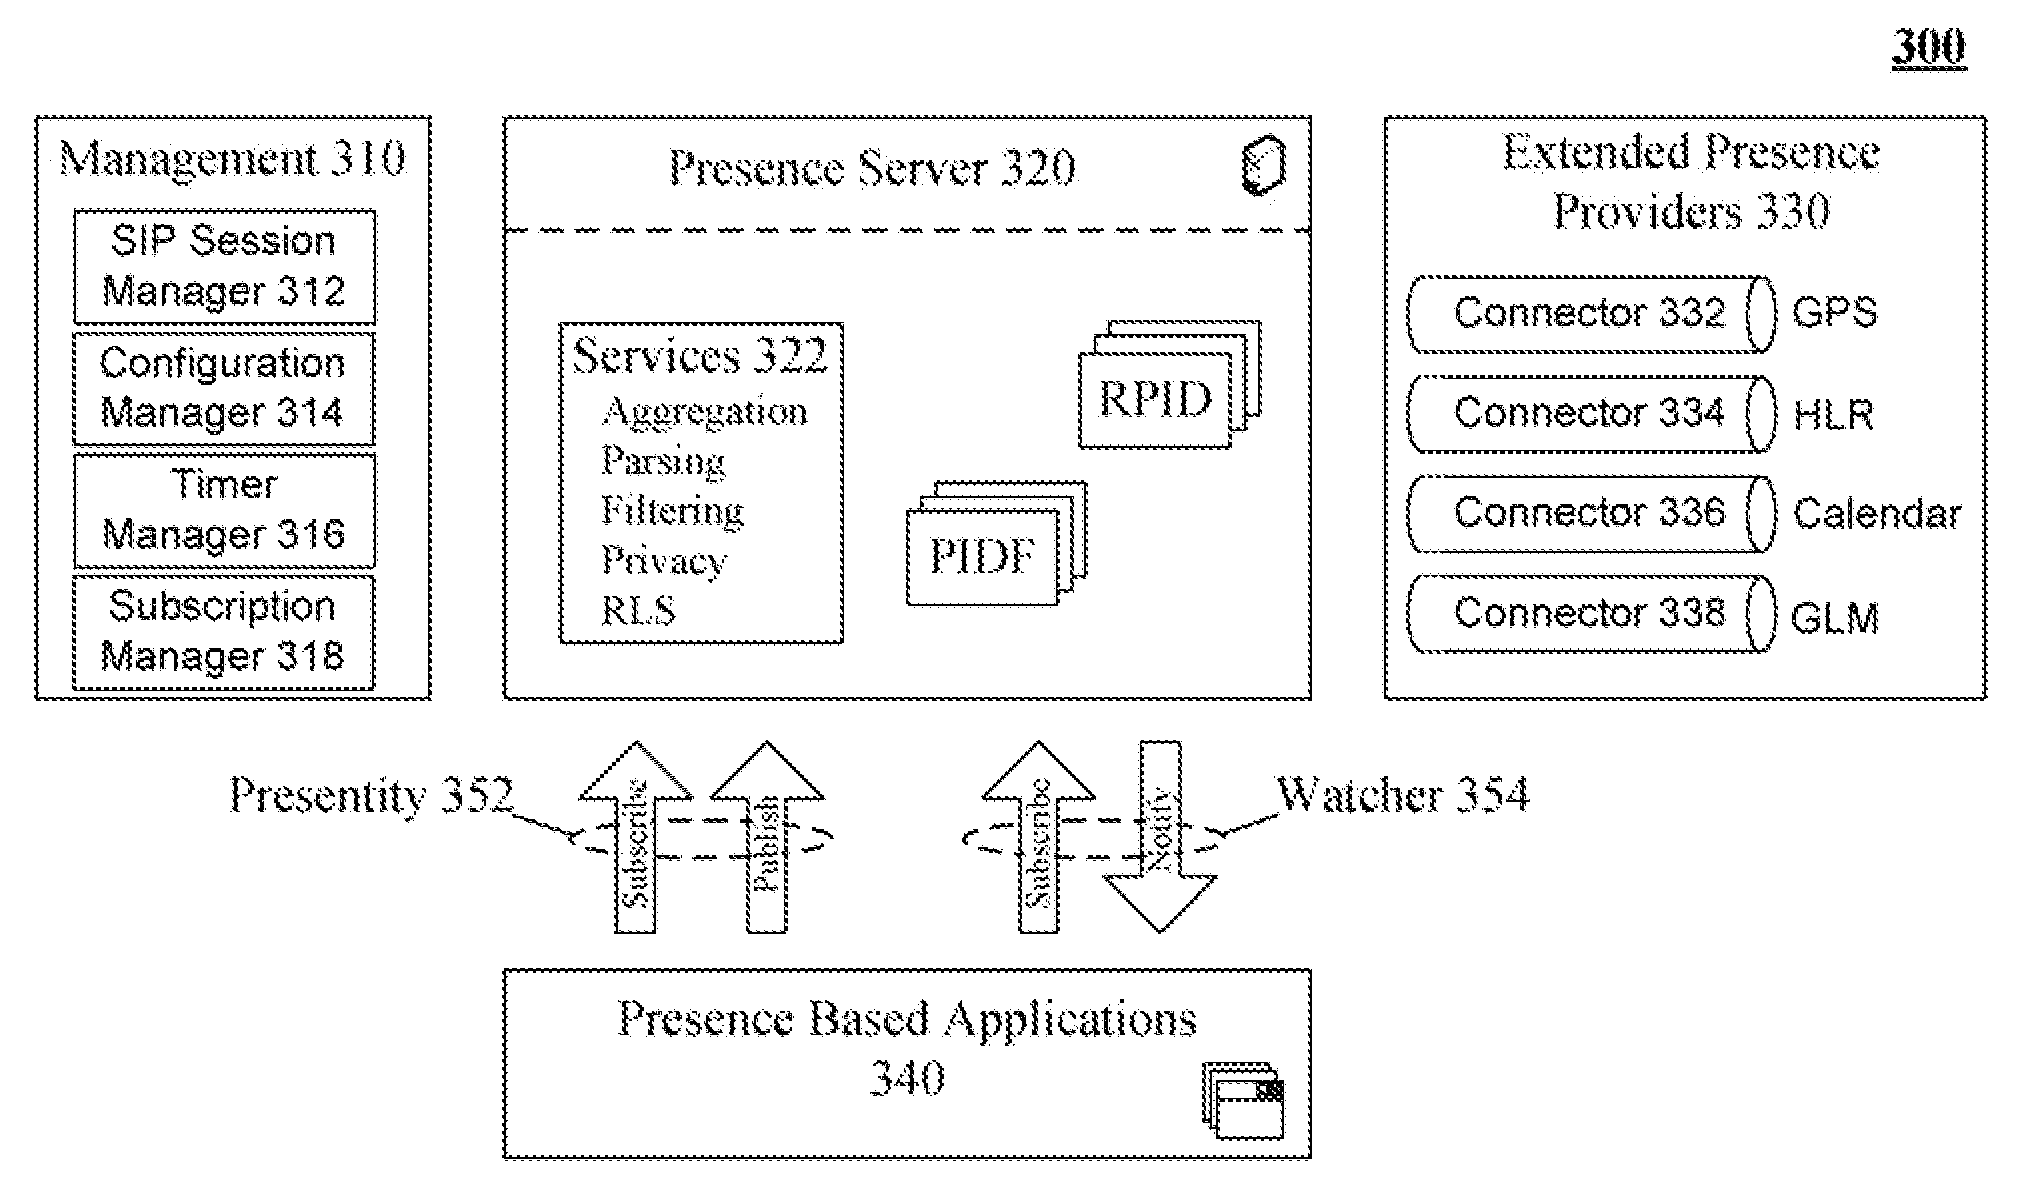 Skills based routing in a standards based contact center using a presence server and expertise specific watchers